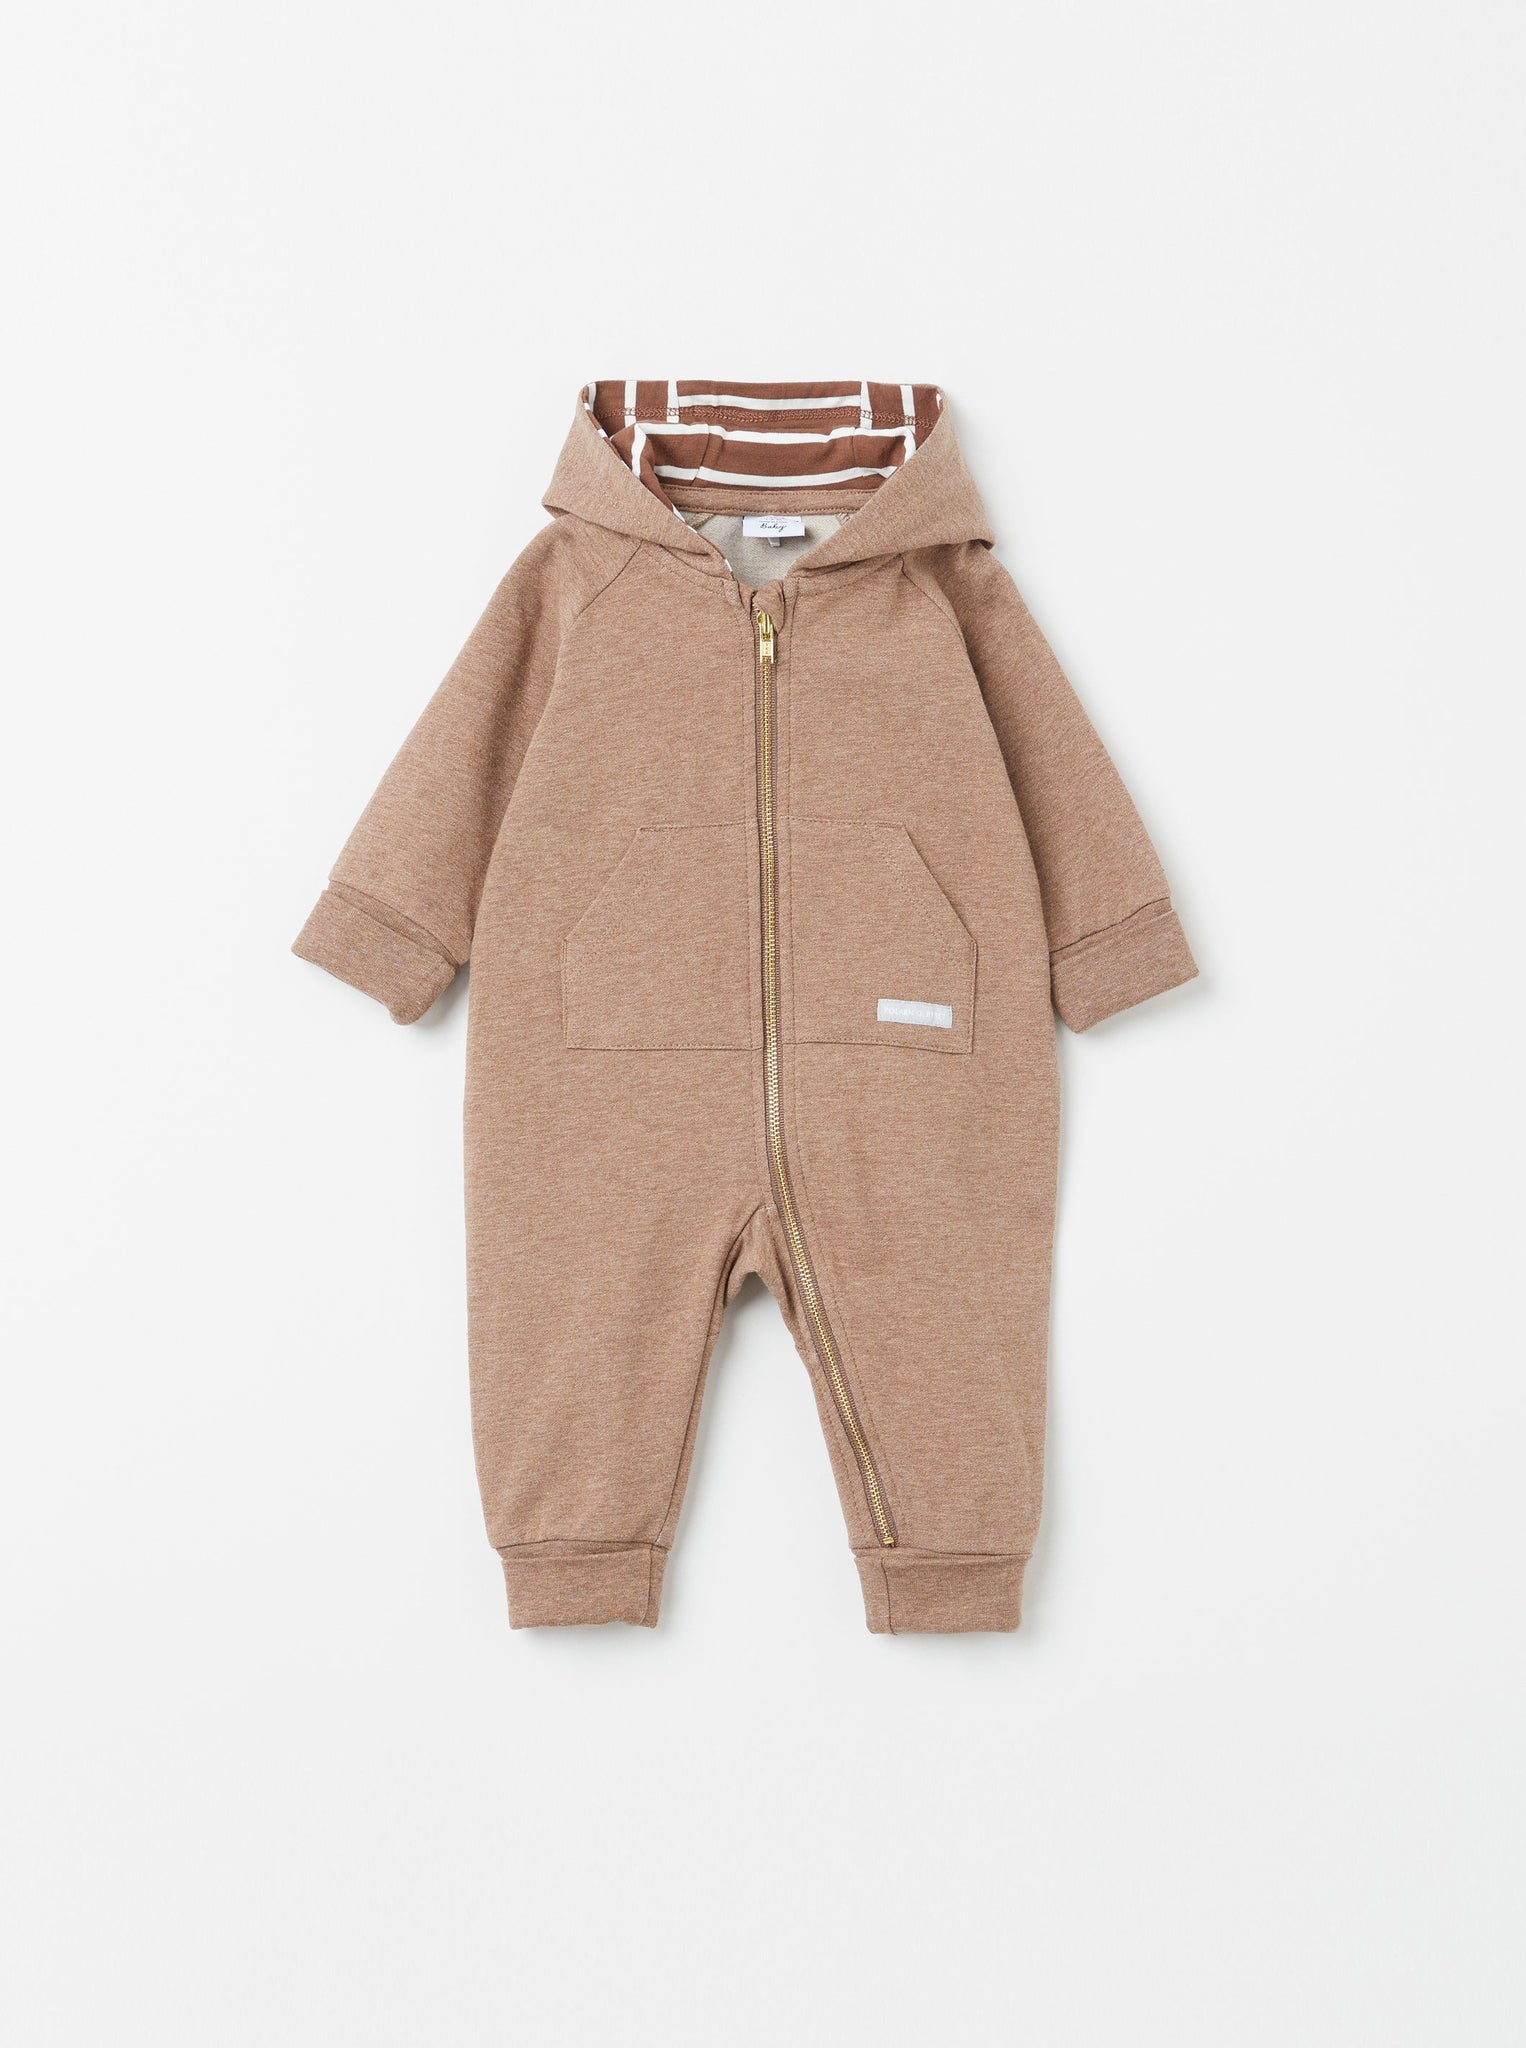 Organic Cotton Brown Baby All-In-One from the Polarn O. Pyret Kidswear collection. Clothes made using sustainably sourced materials.